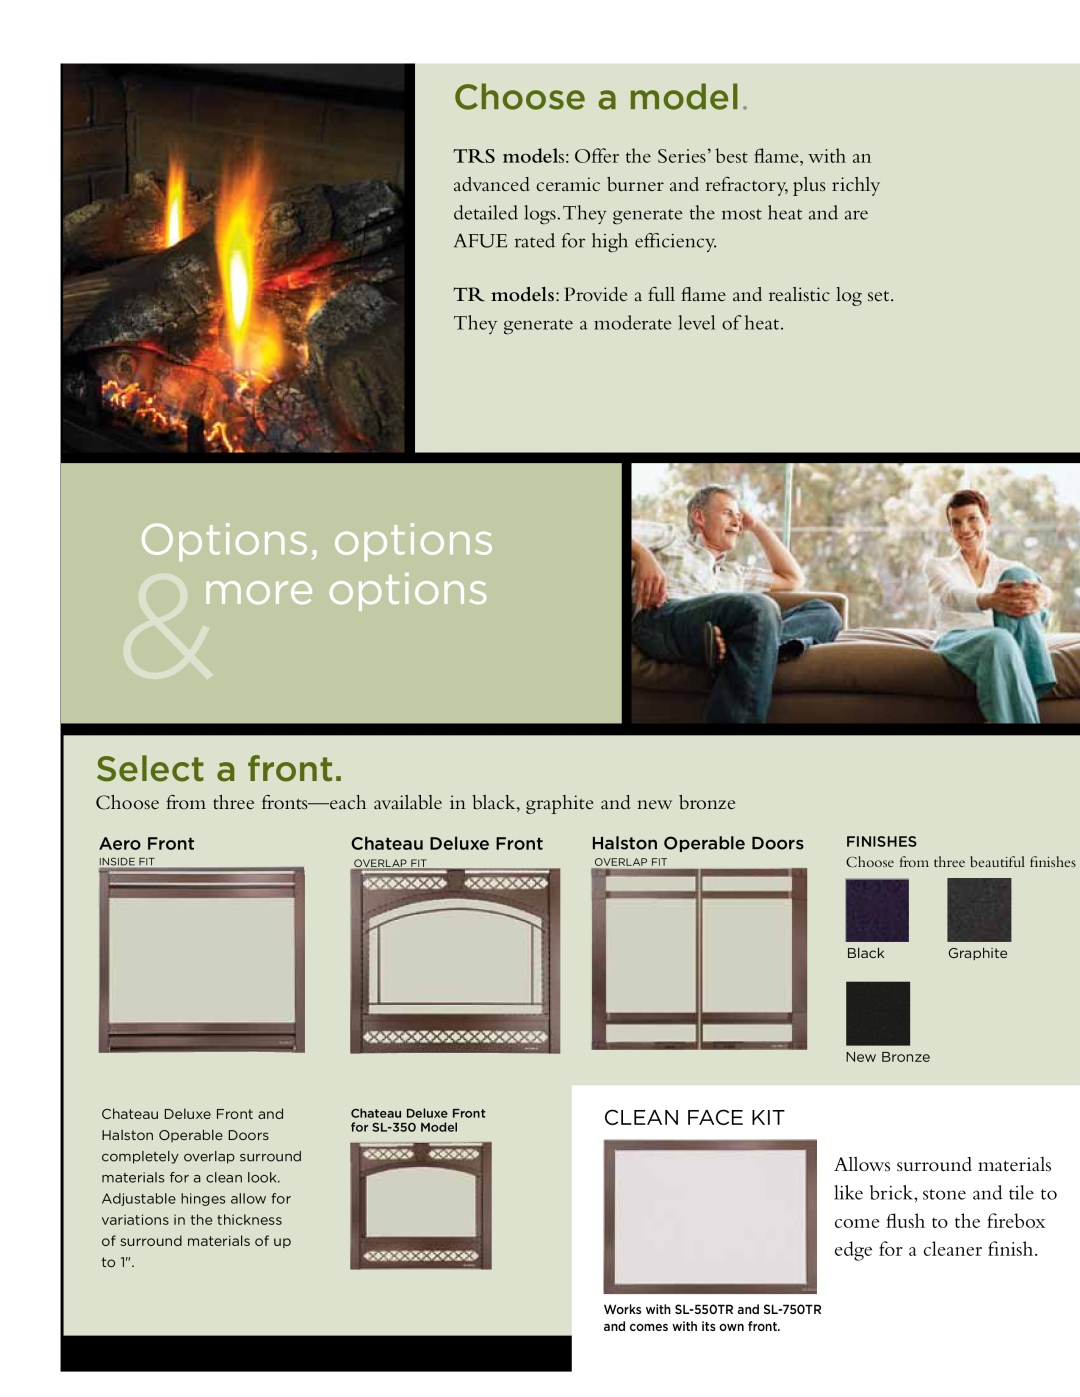 Hearth and Home Technologies SL-950, SL-550, SL-350, SL-750 Options, options &more options, Choose a model, Select a front 